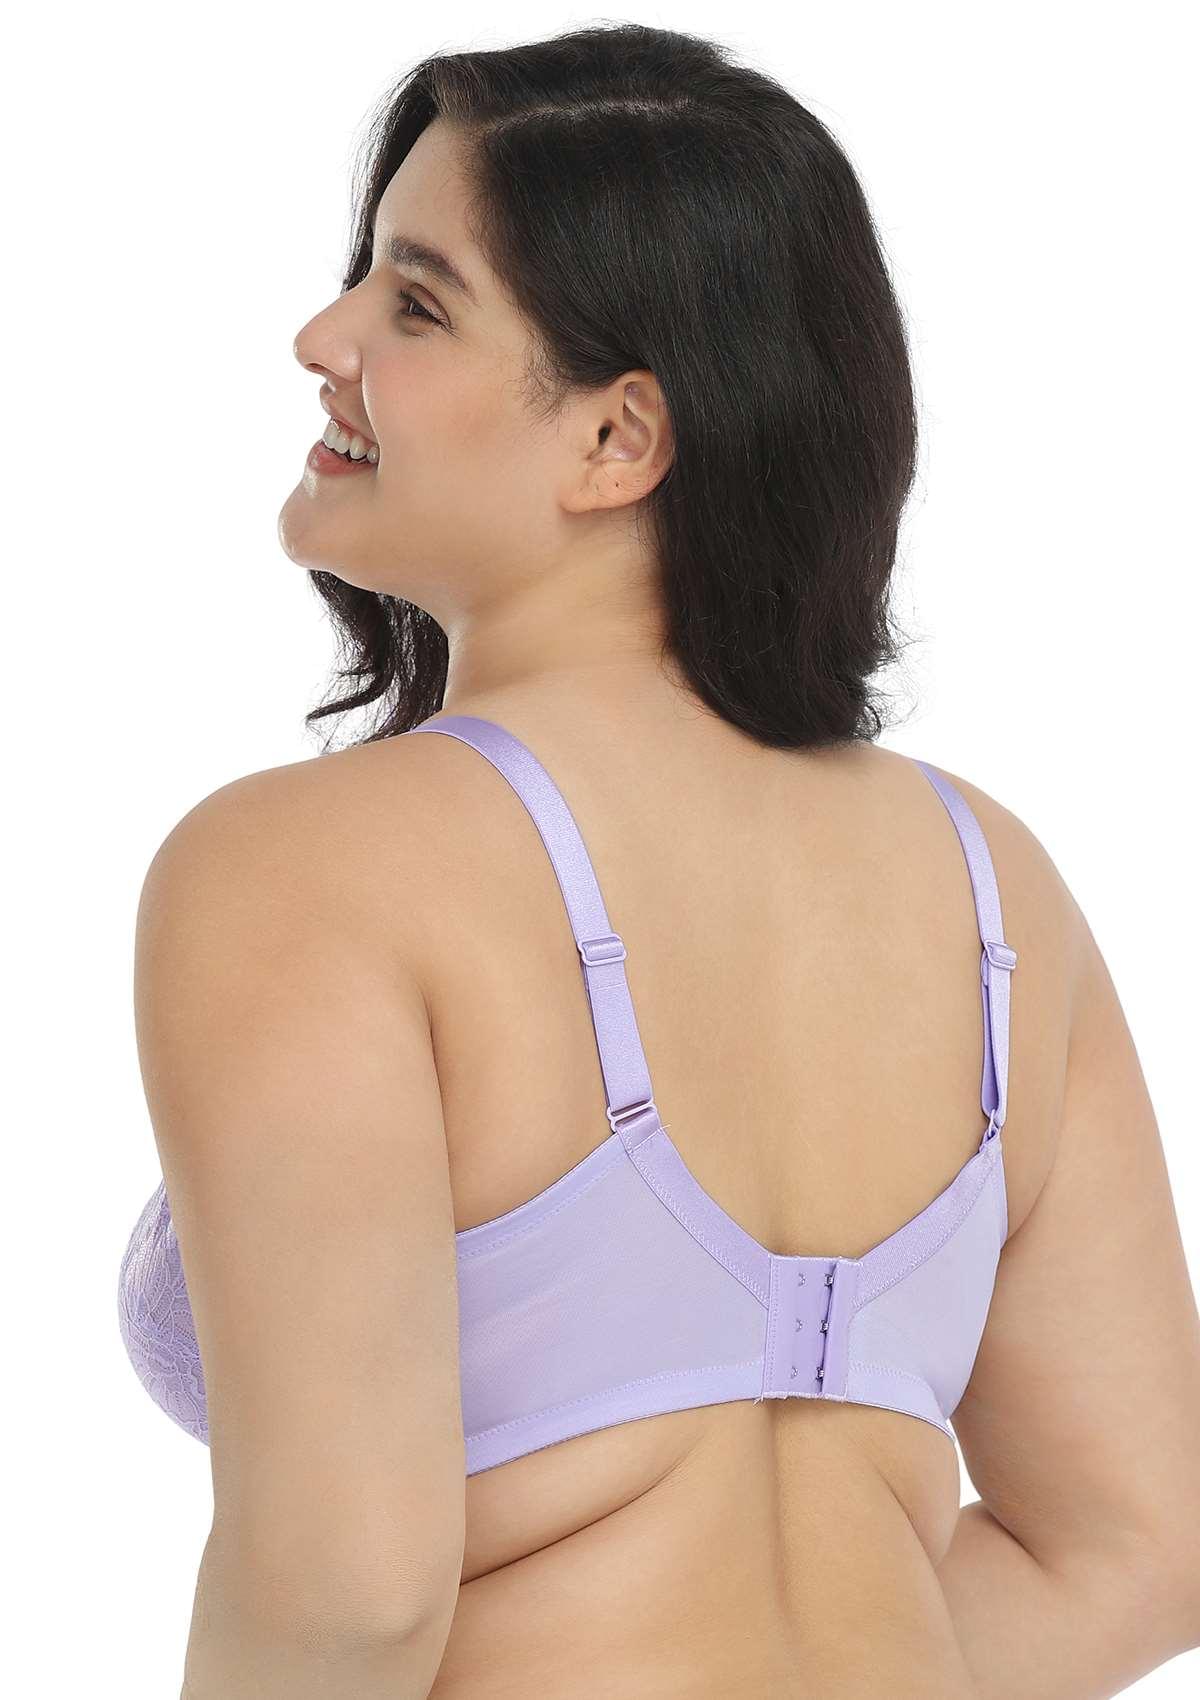 HSIA Blossom Transparent Lace Bra: Plus Size Wired Back Smoothing Bra - Purple / 34 / C